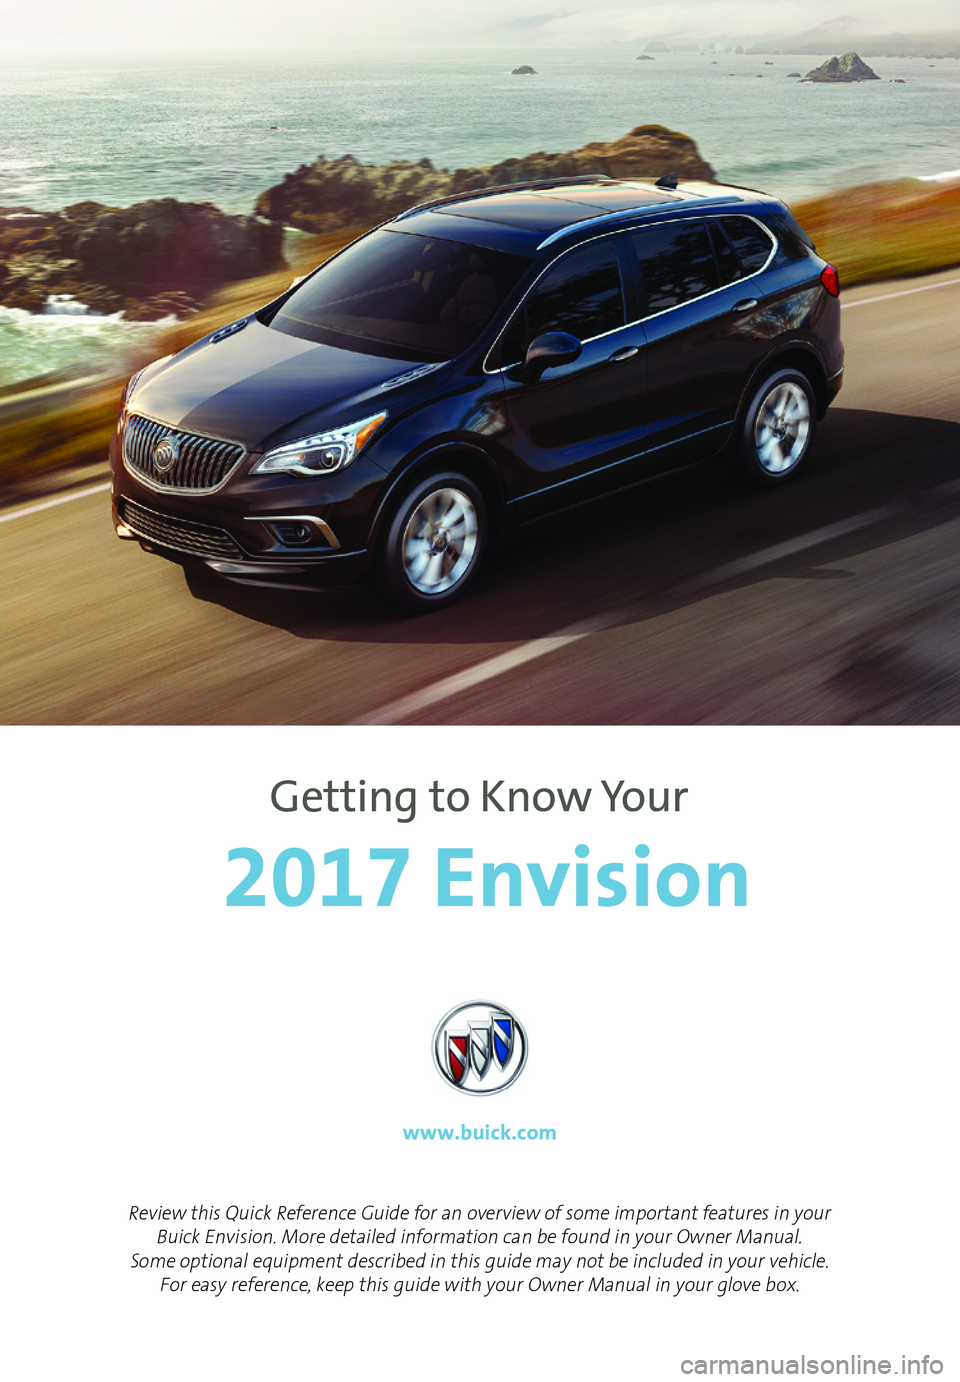 BUICK ENVISION 2017  Get To Know Guide 